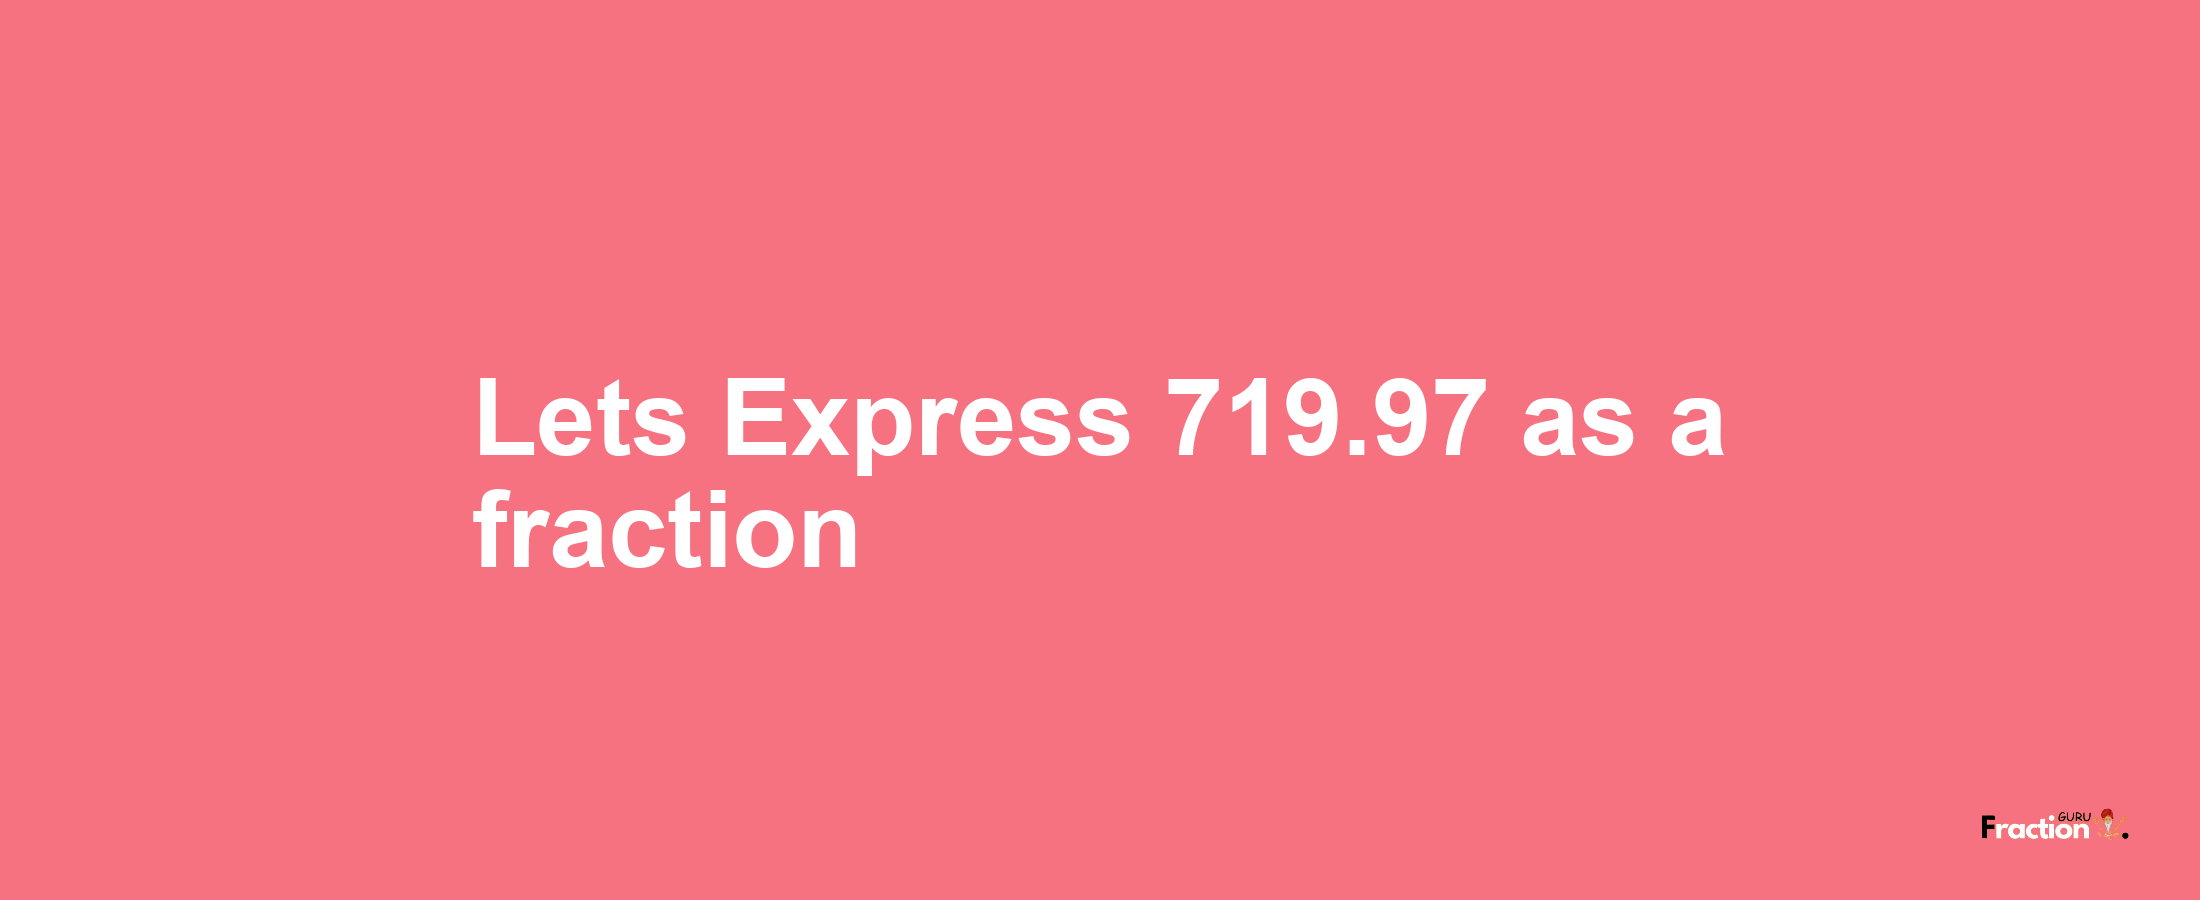 Lets Express 719.97 as afraction